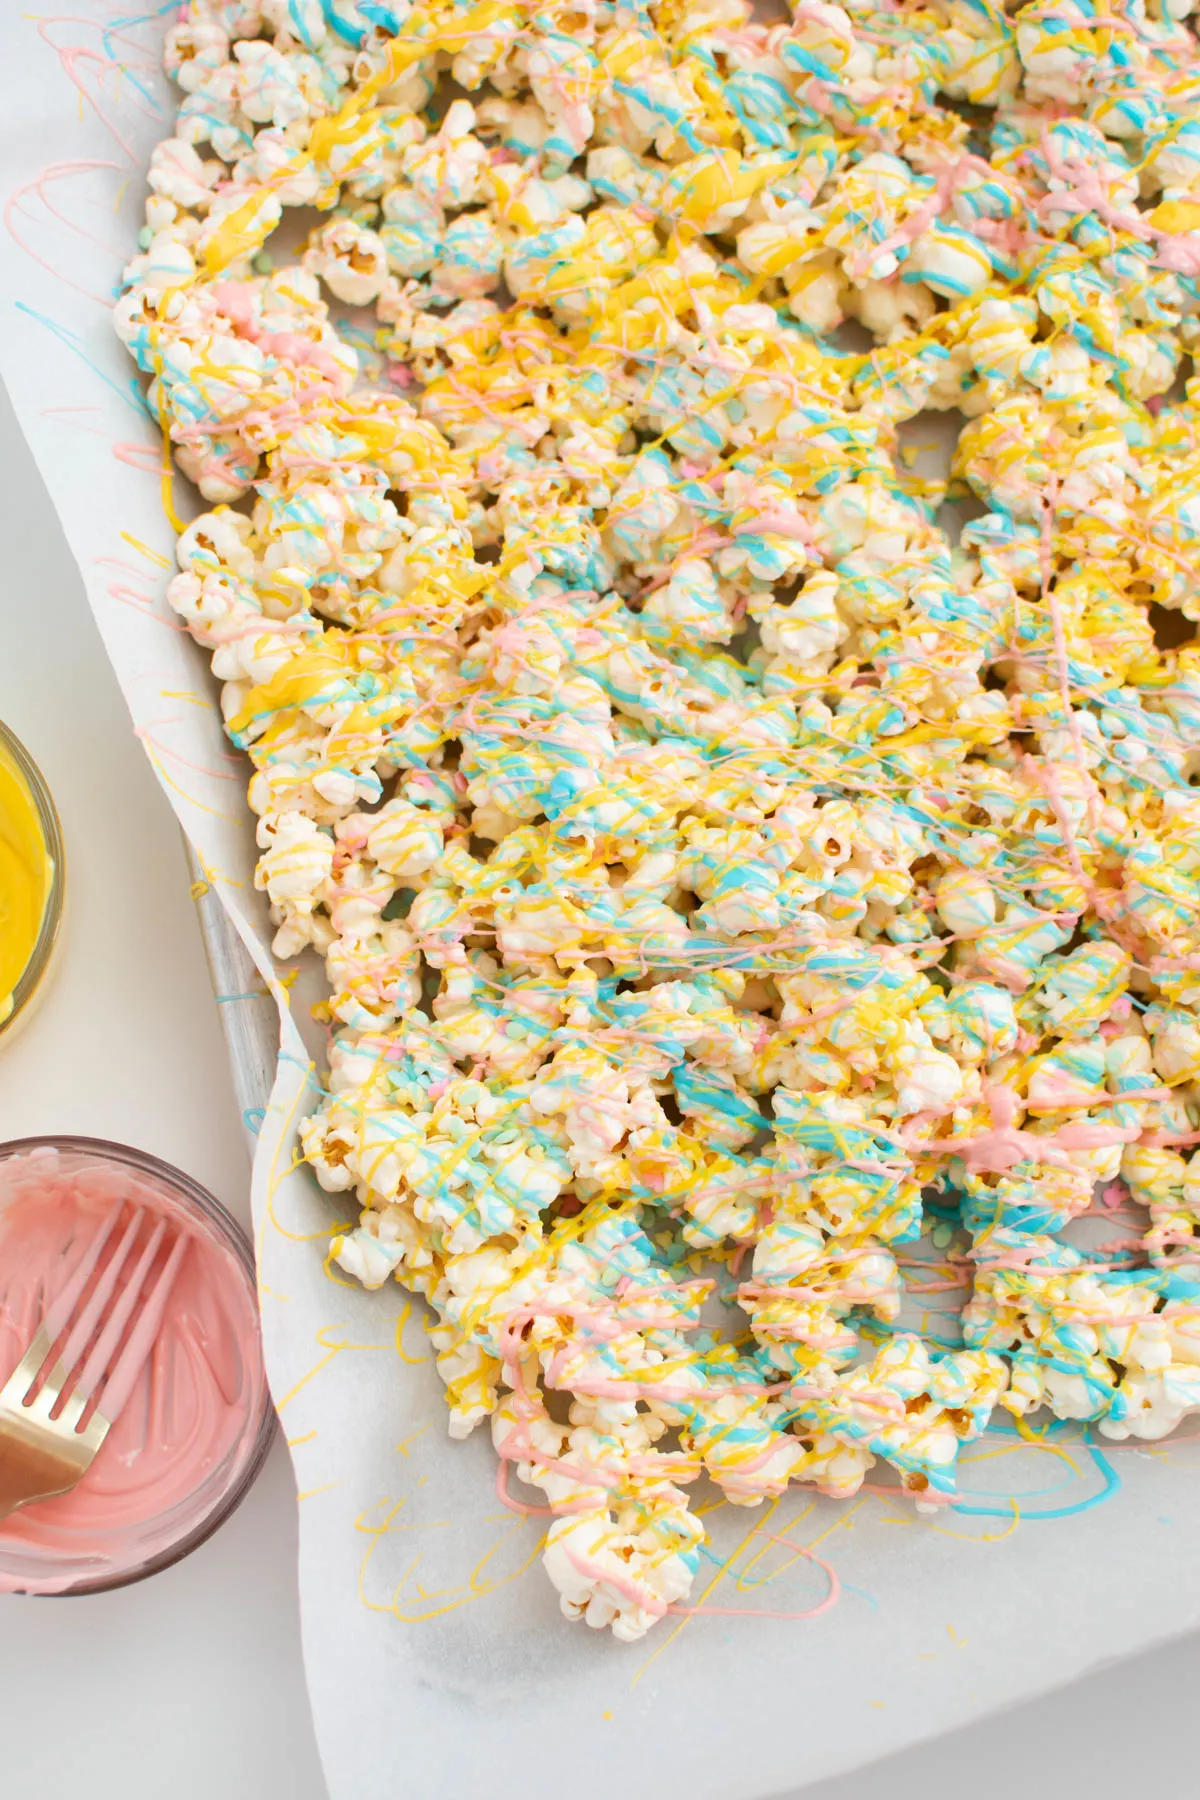 Popcorn drizzled with yellow, pink, and blue chocolate on parchment lined pan.